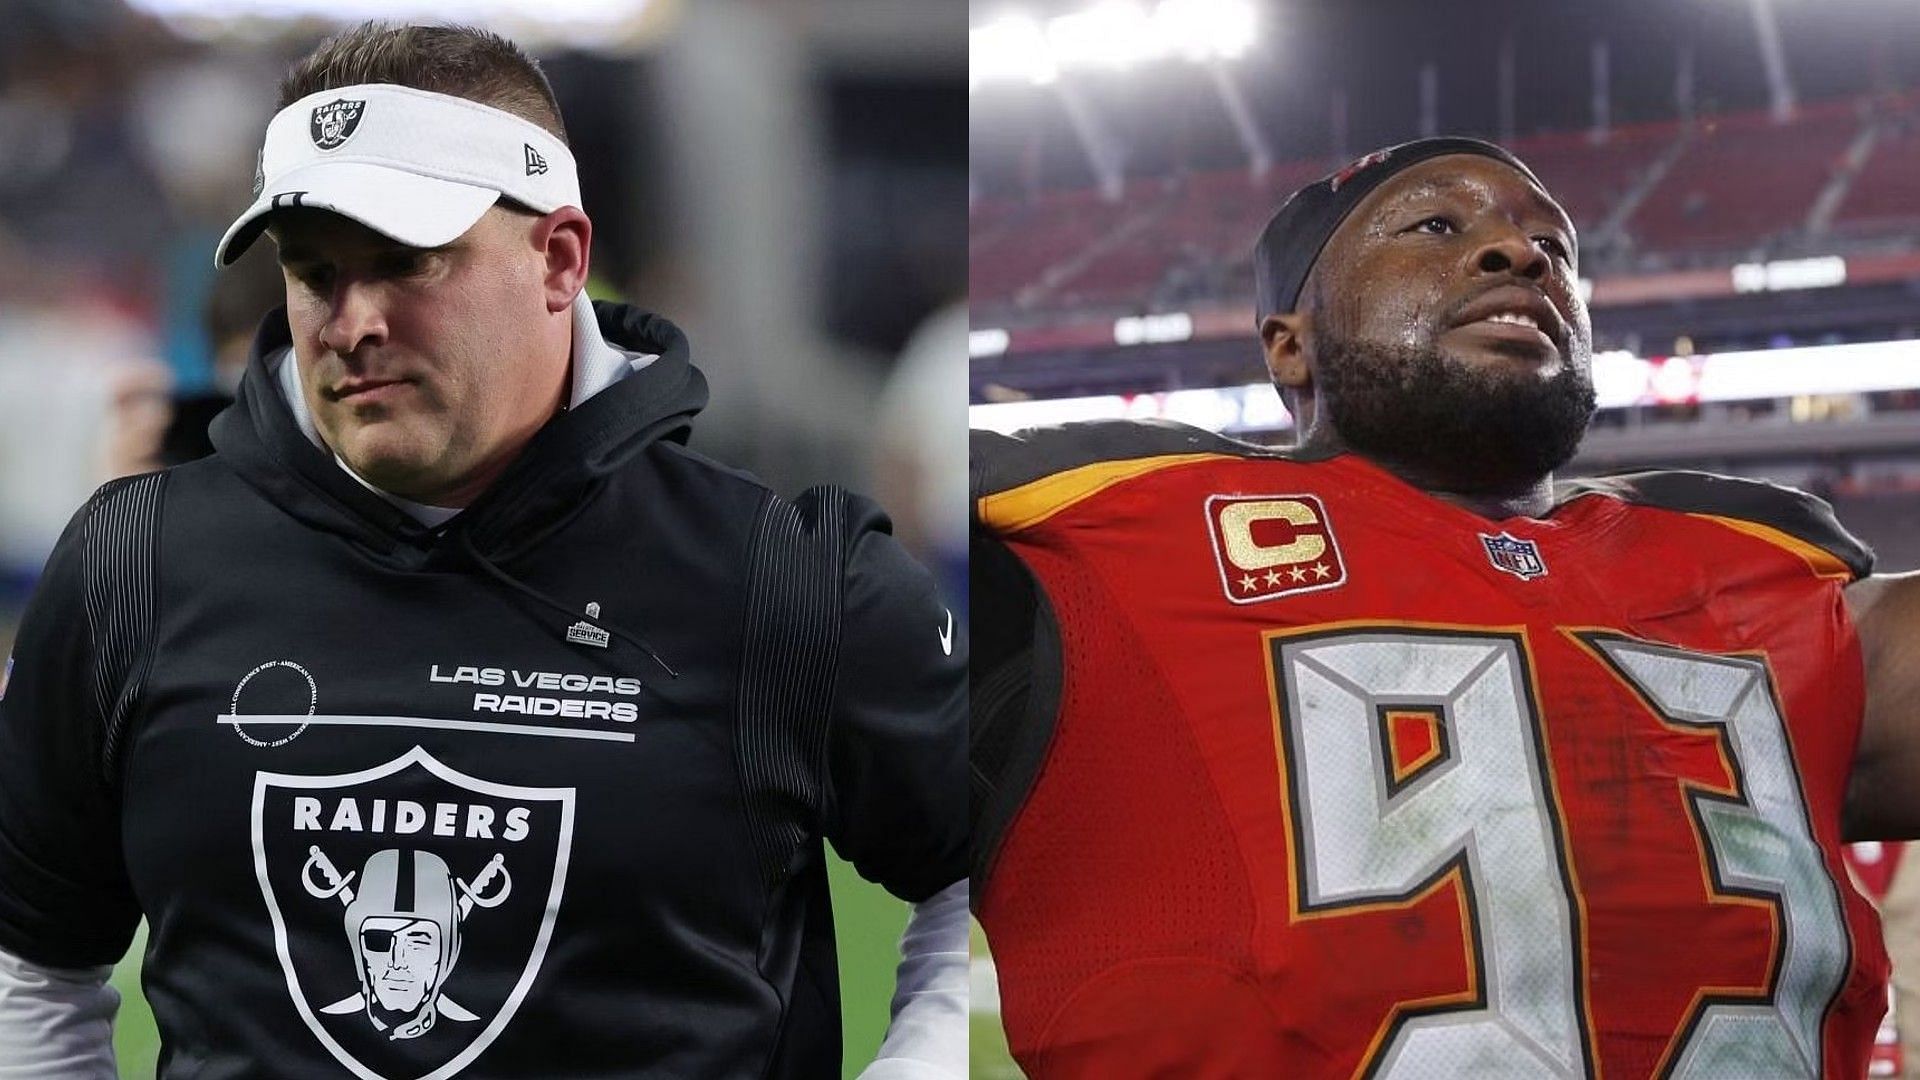 Gerald McCoy compares Josh McDaniels to the wicked witch from The Wizard of Oz